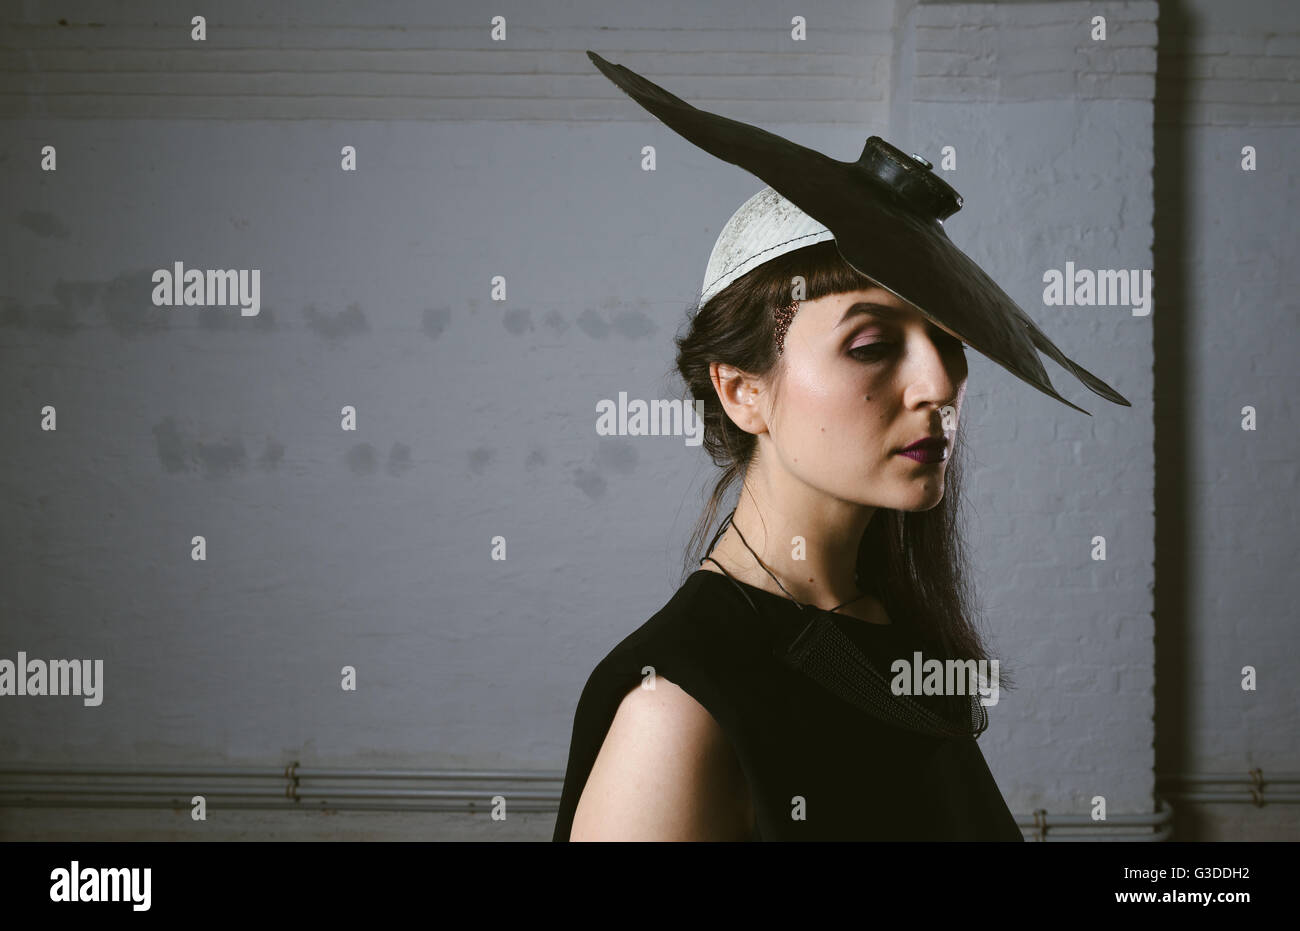 Fashion model with cymbal hat Stock Photo